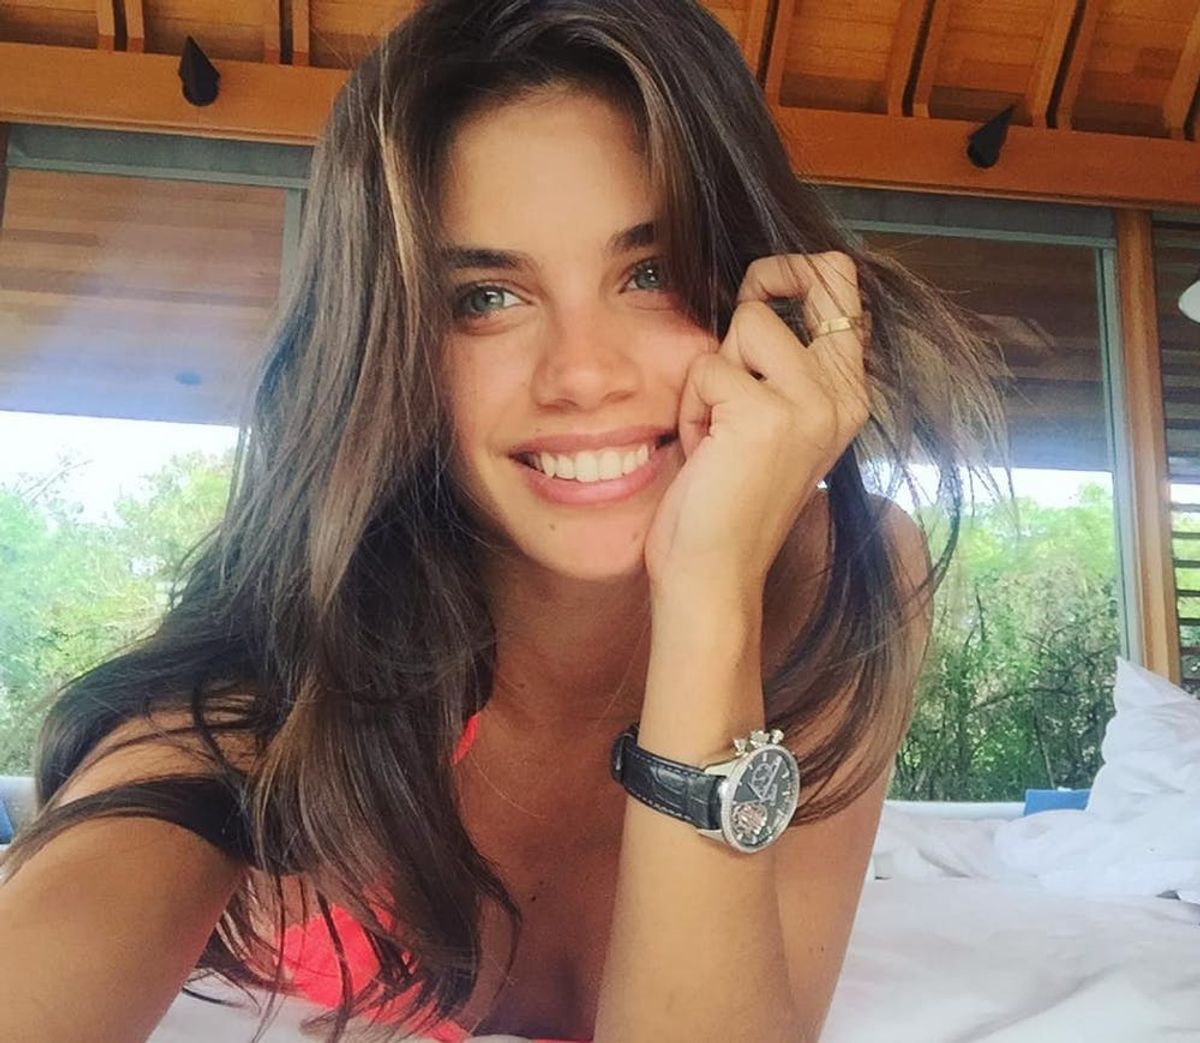 10 No-Makeup Selfies from Your Fave Victoria’s Secret Angels